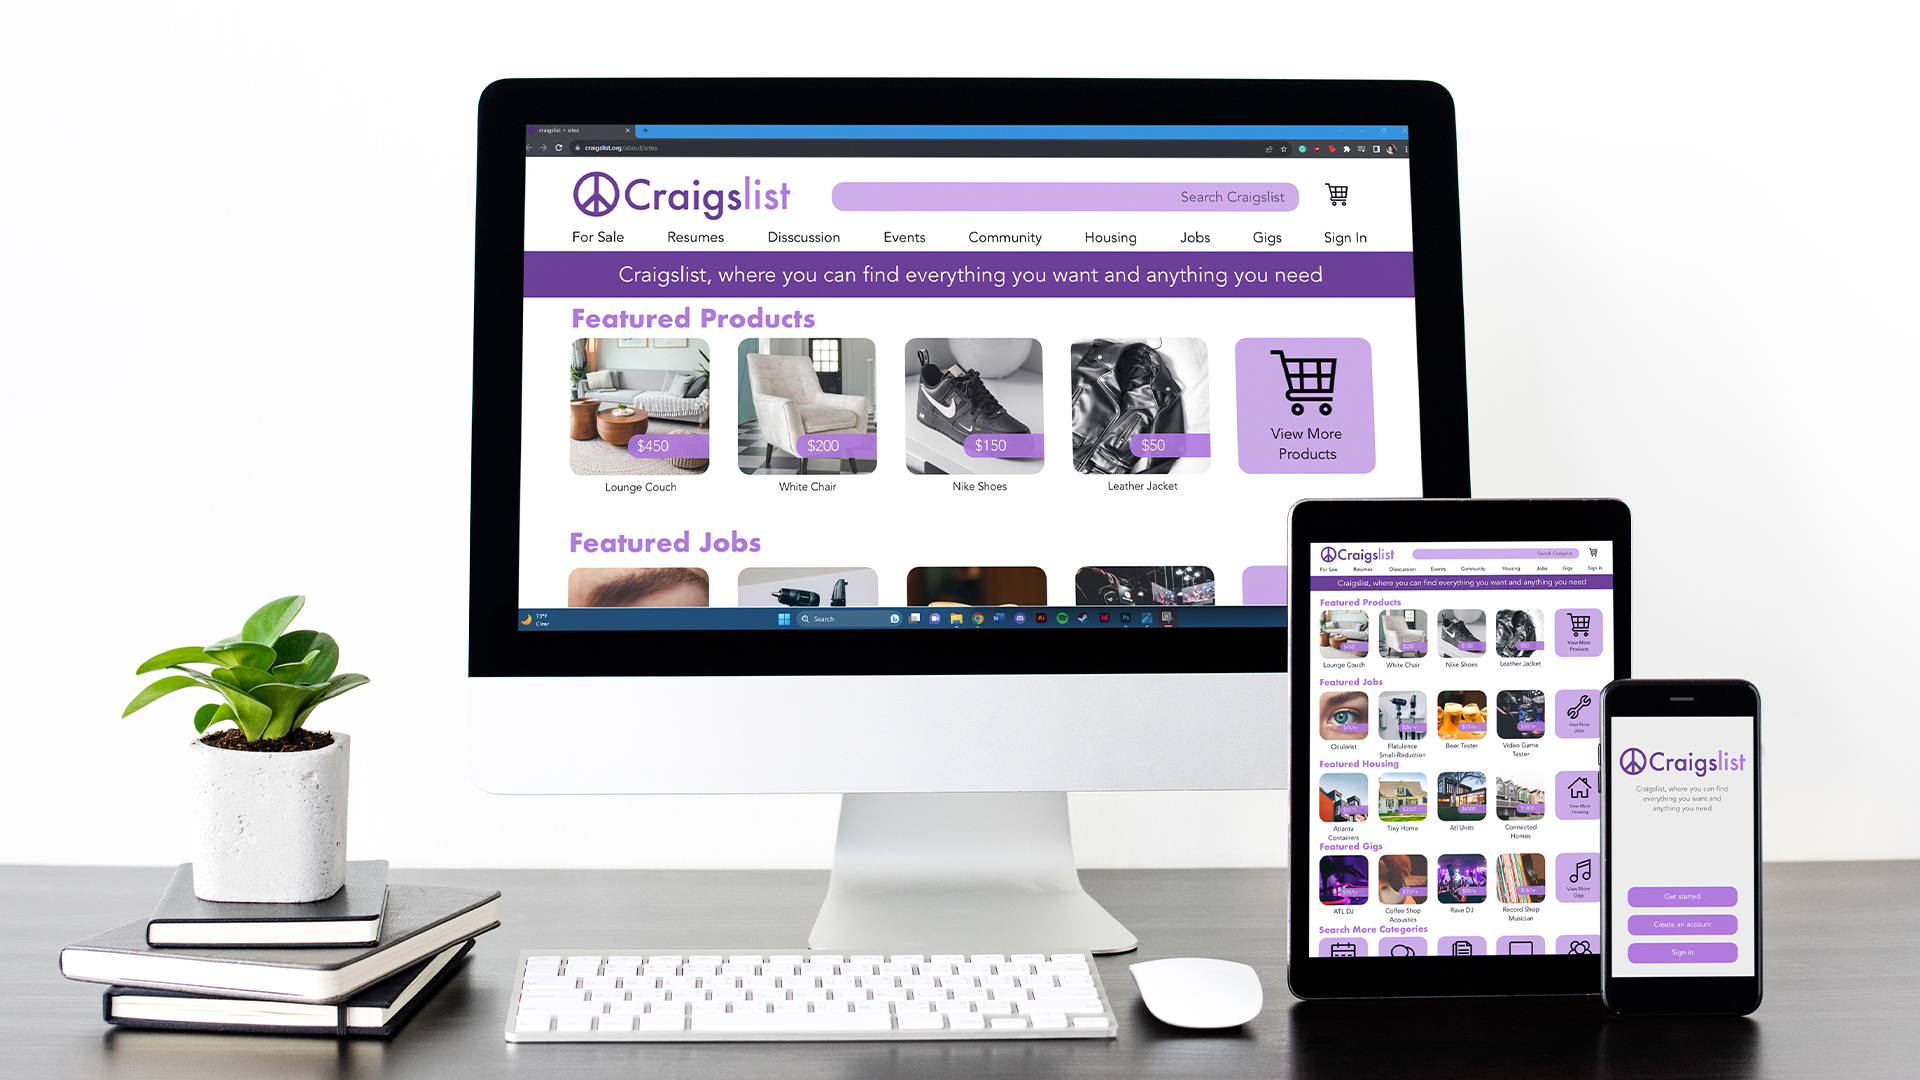 "Craigslist Website Redesign,"  / "Craigslist Website Redesign," digital devices, design for computer, tablet, and mobile device sizes, 2021. This is a webpage redesign for the existing online "Craigslist‚"marketplace. It creates a more unified and cohesive layout that is less distracting